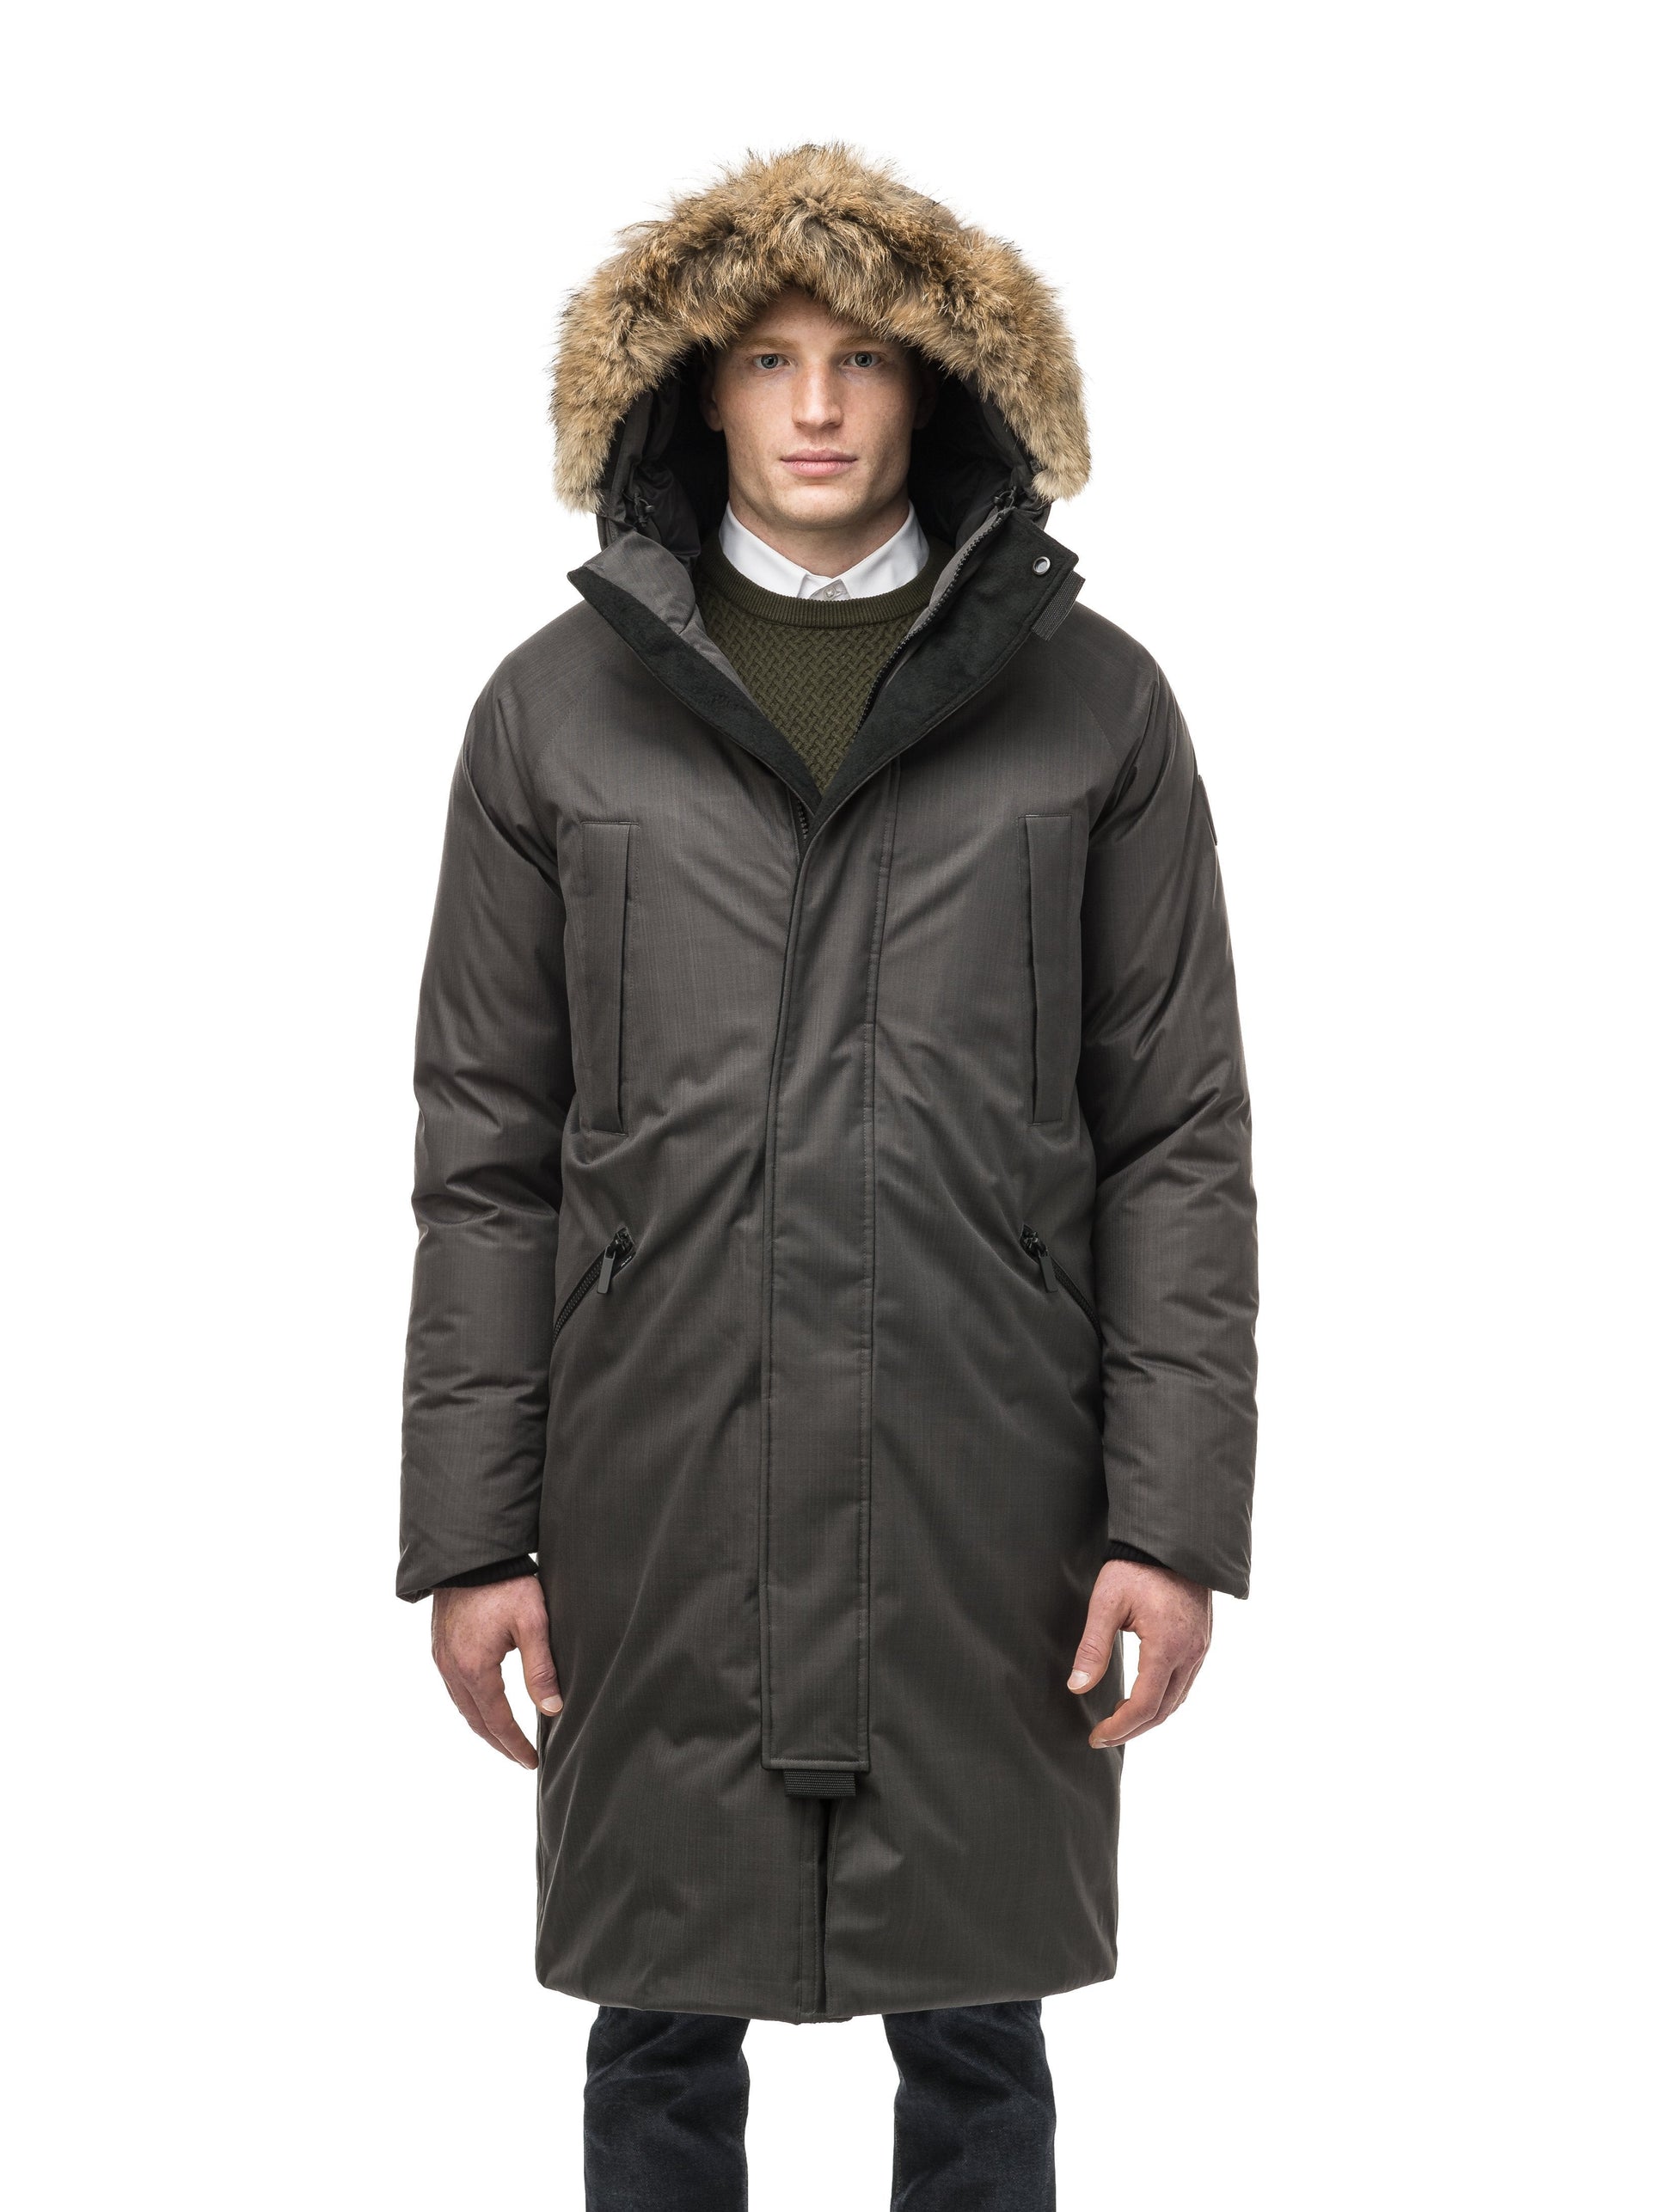 This ankle length men's down filled parka doubles as an over coat with a removable fur trim on the hood in Steel Grey